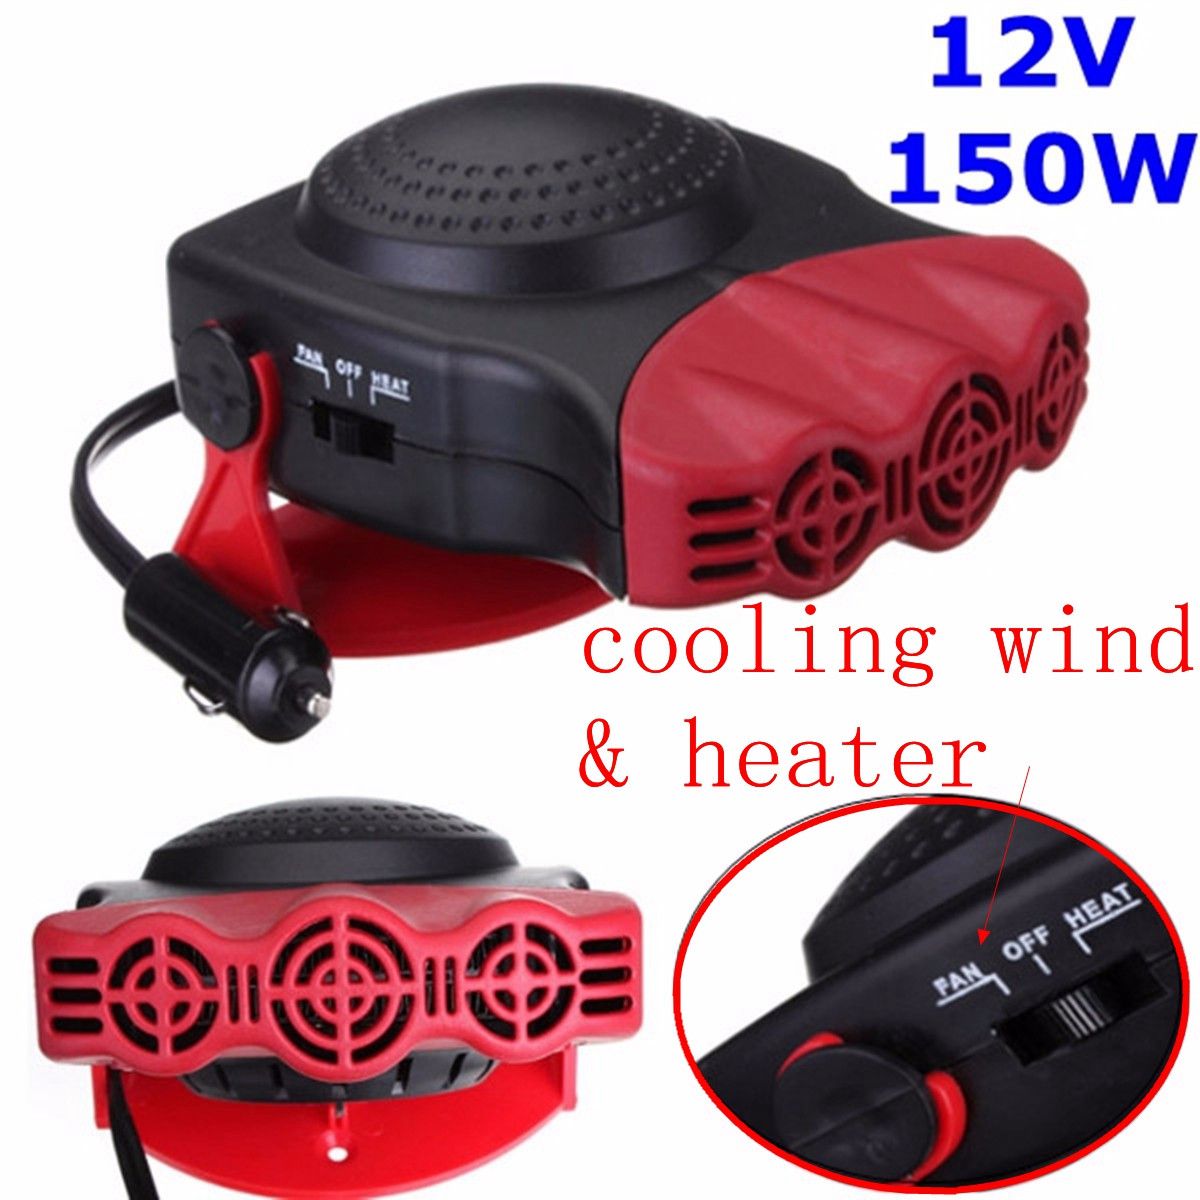 150W-2-in-1-Car-Heater-Heating-and-Cool-Fan-Windscreedn-Demister-Defroster-960486